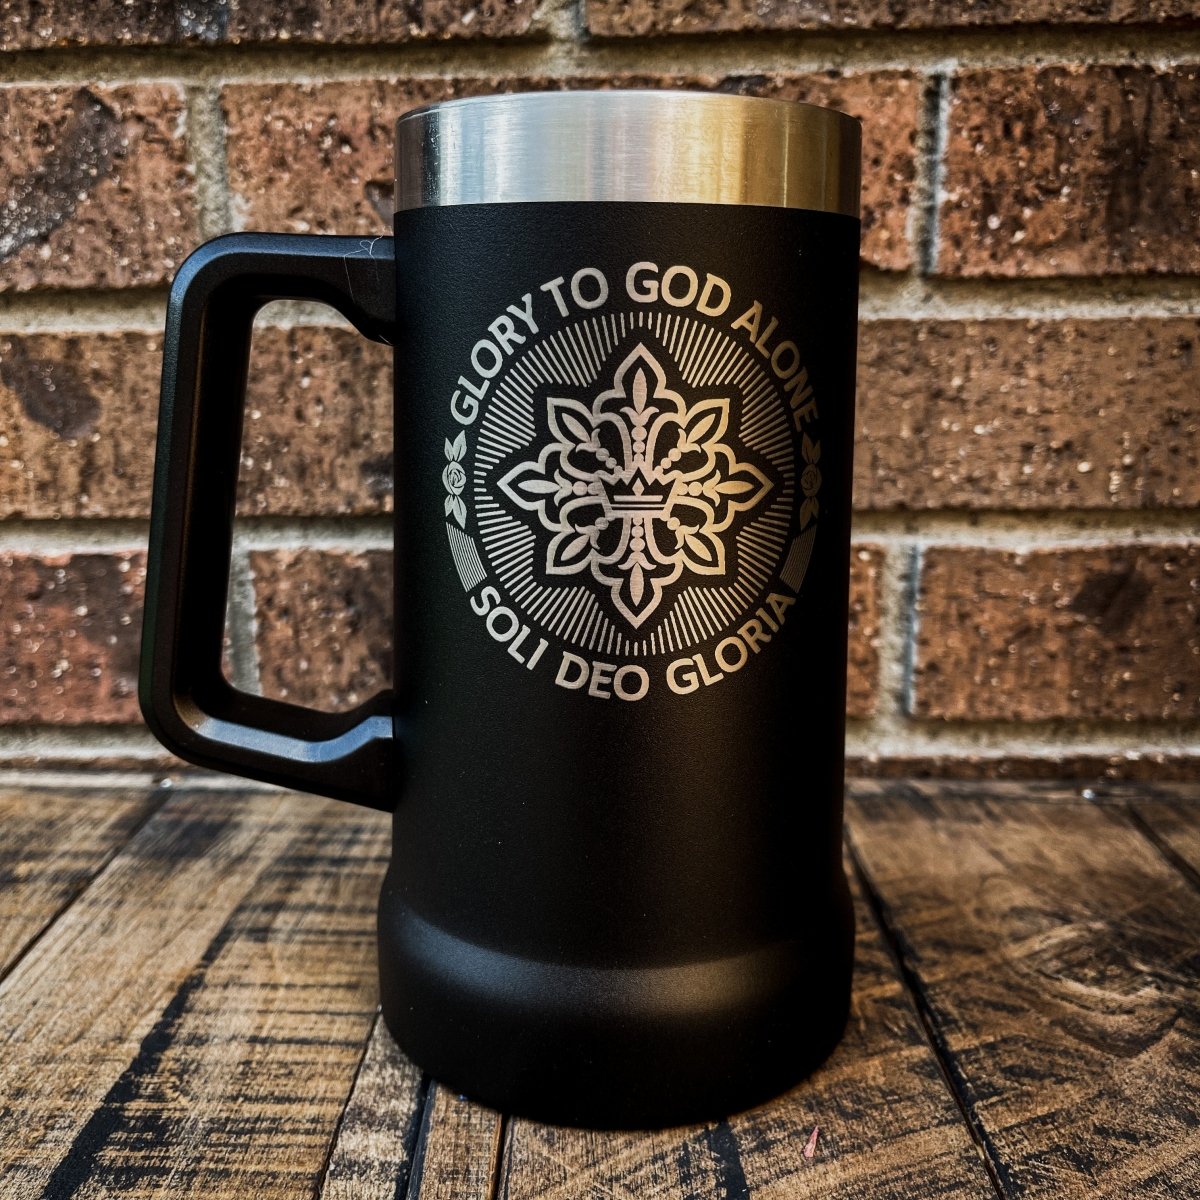 24oz Stein - Soli Deo Gloria Seal - 24oz Stein - The Reformed Sage - #reformed# - #reformed_gifts# - #christian_gifts#